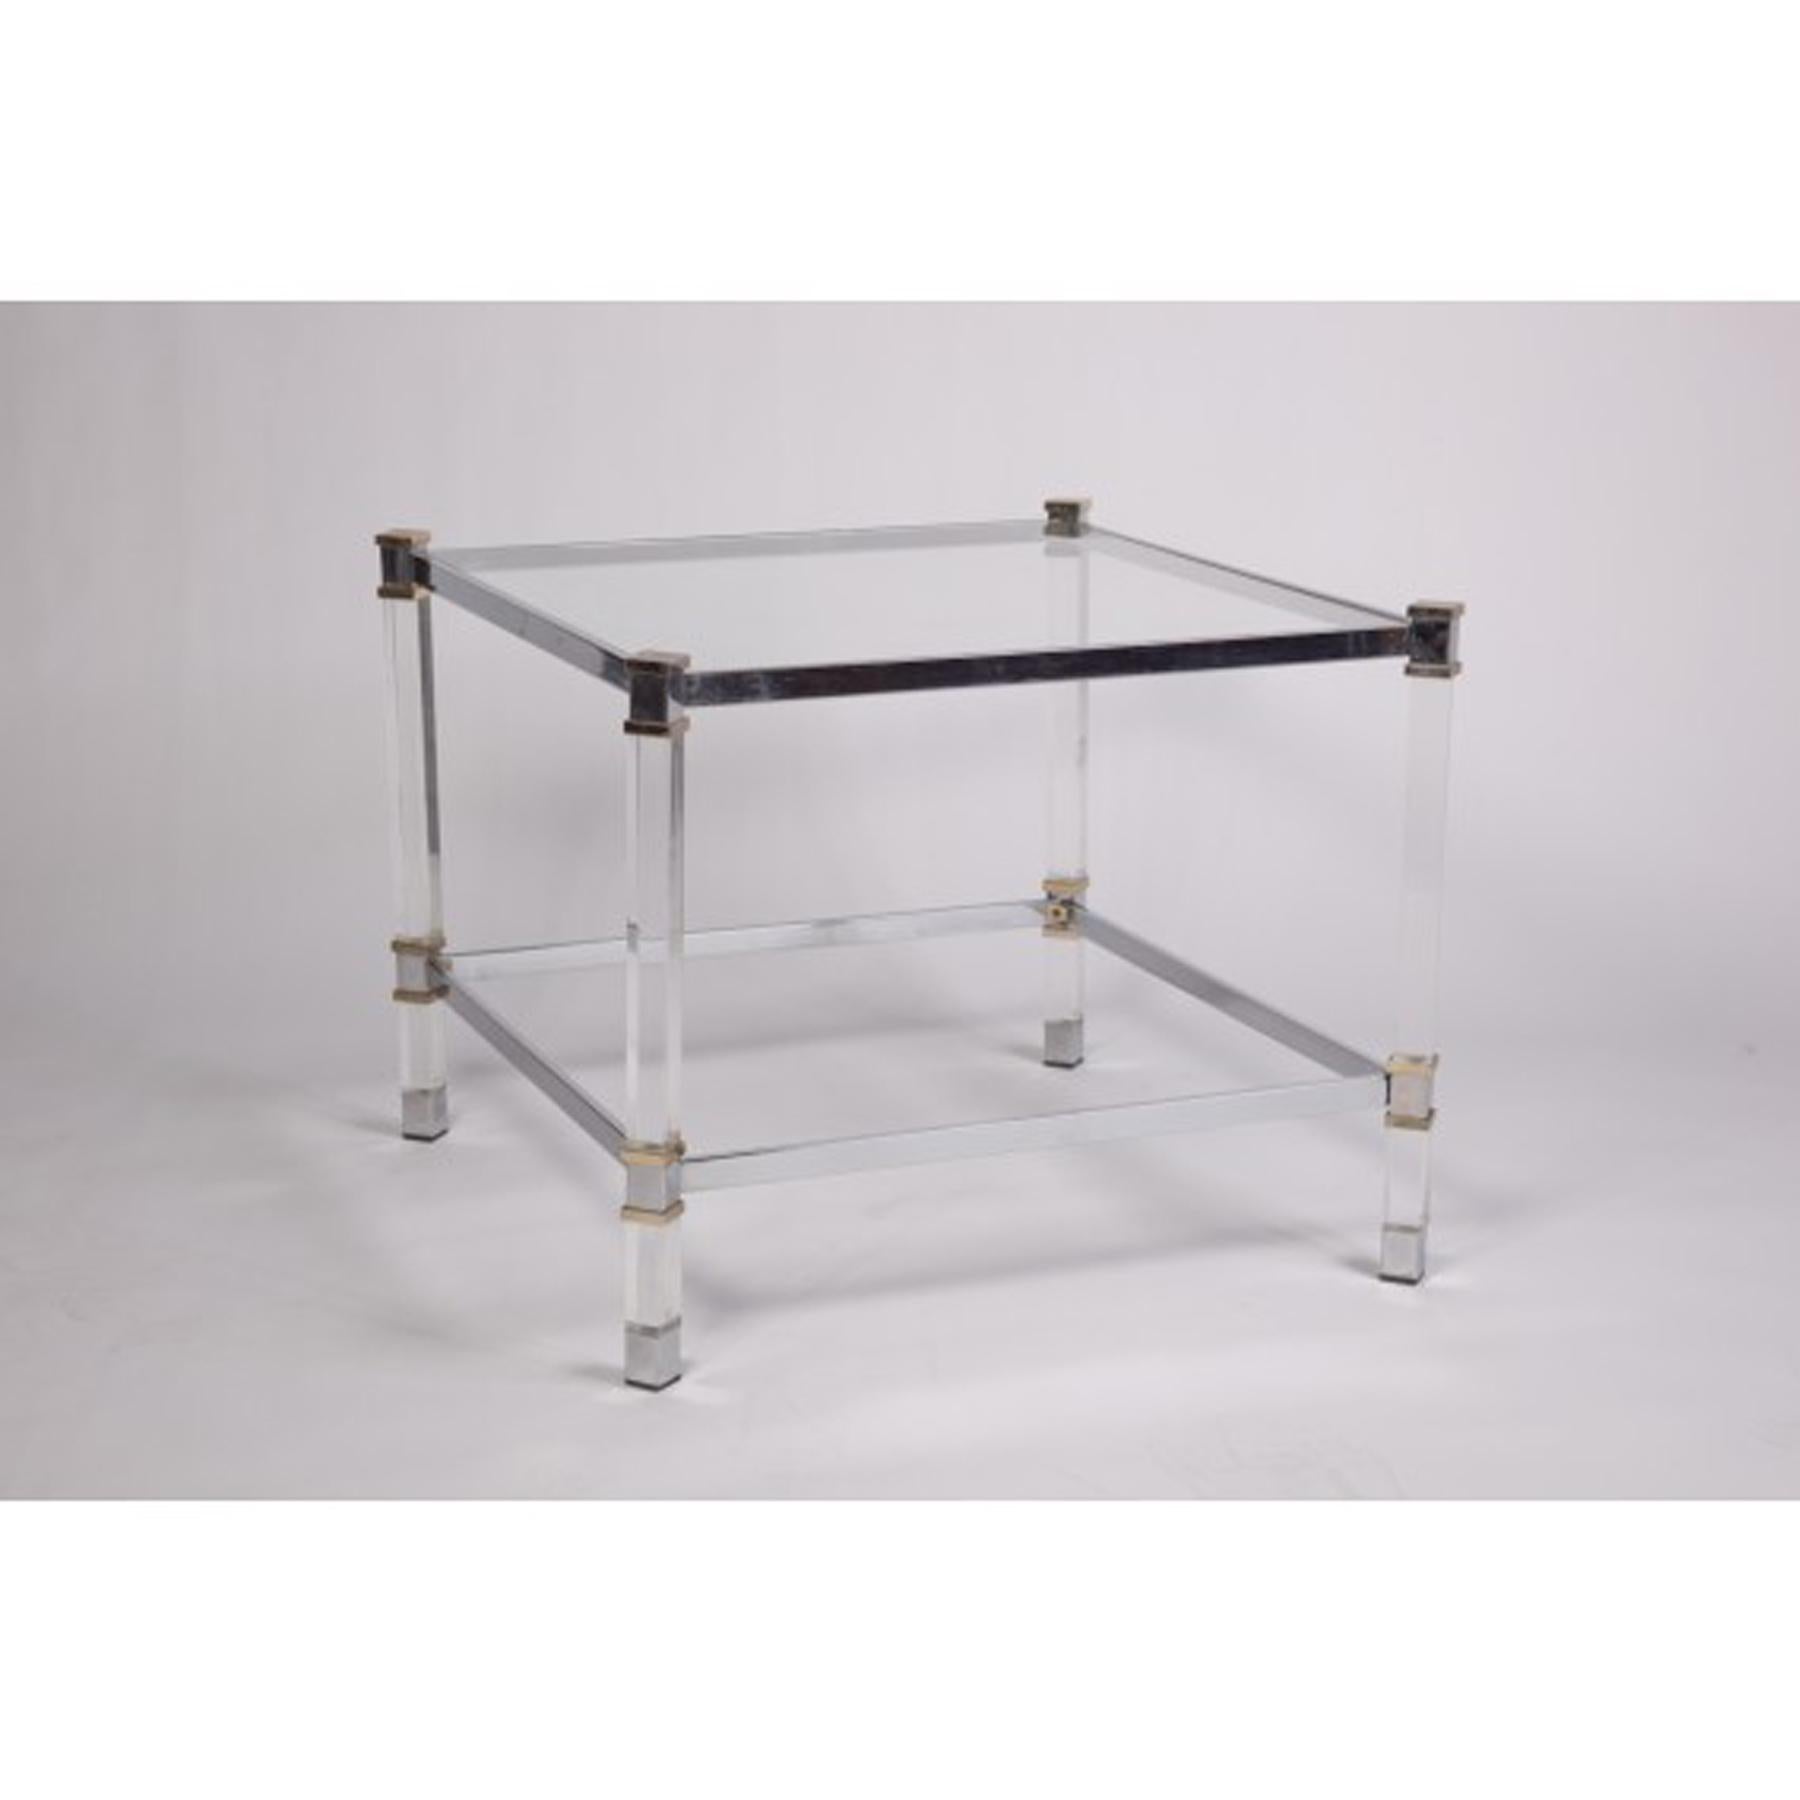 Pair of stunning lucite and chrome occasional tables. Brass details on corners add sophistication and charm. Glass top set into chrome frame. Thick square lucite legs.